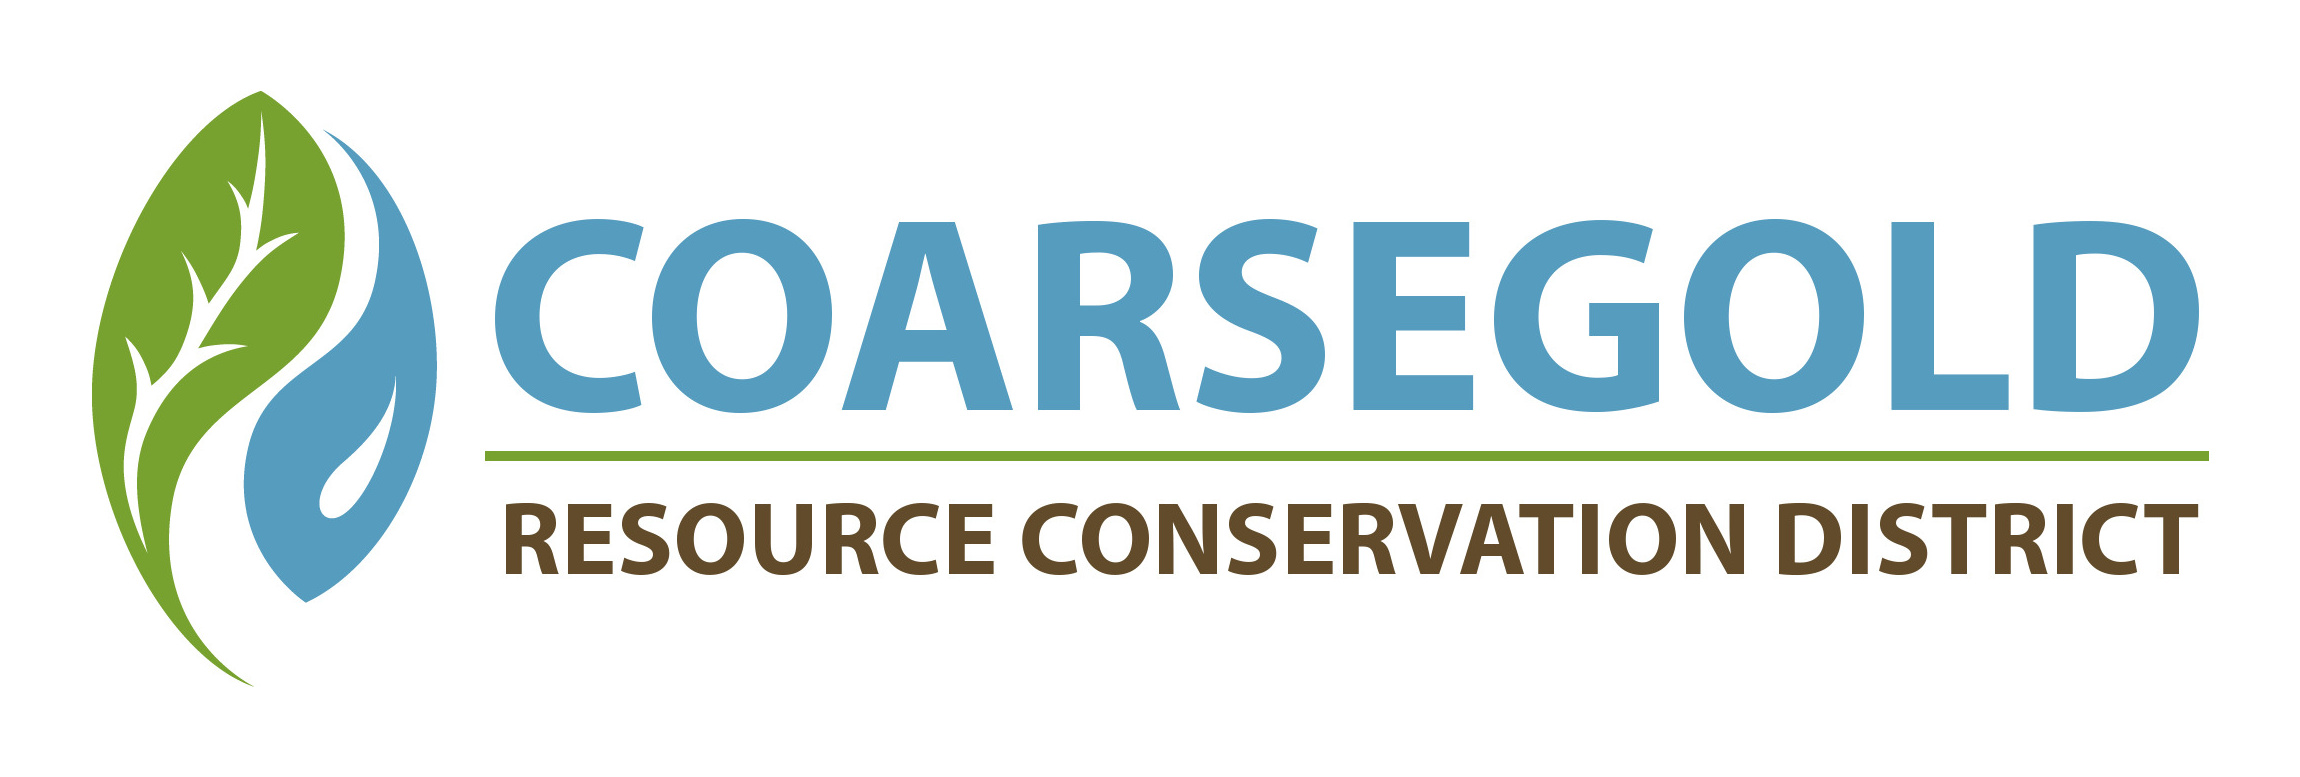 Coarsegold Resource Conservation District (CRCD) logo